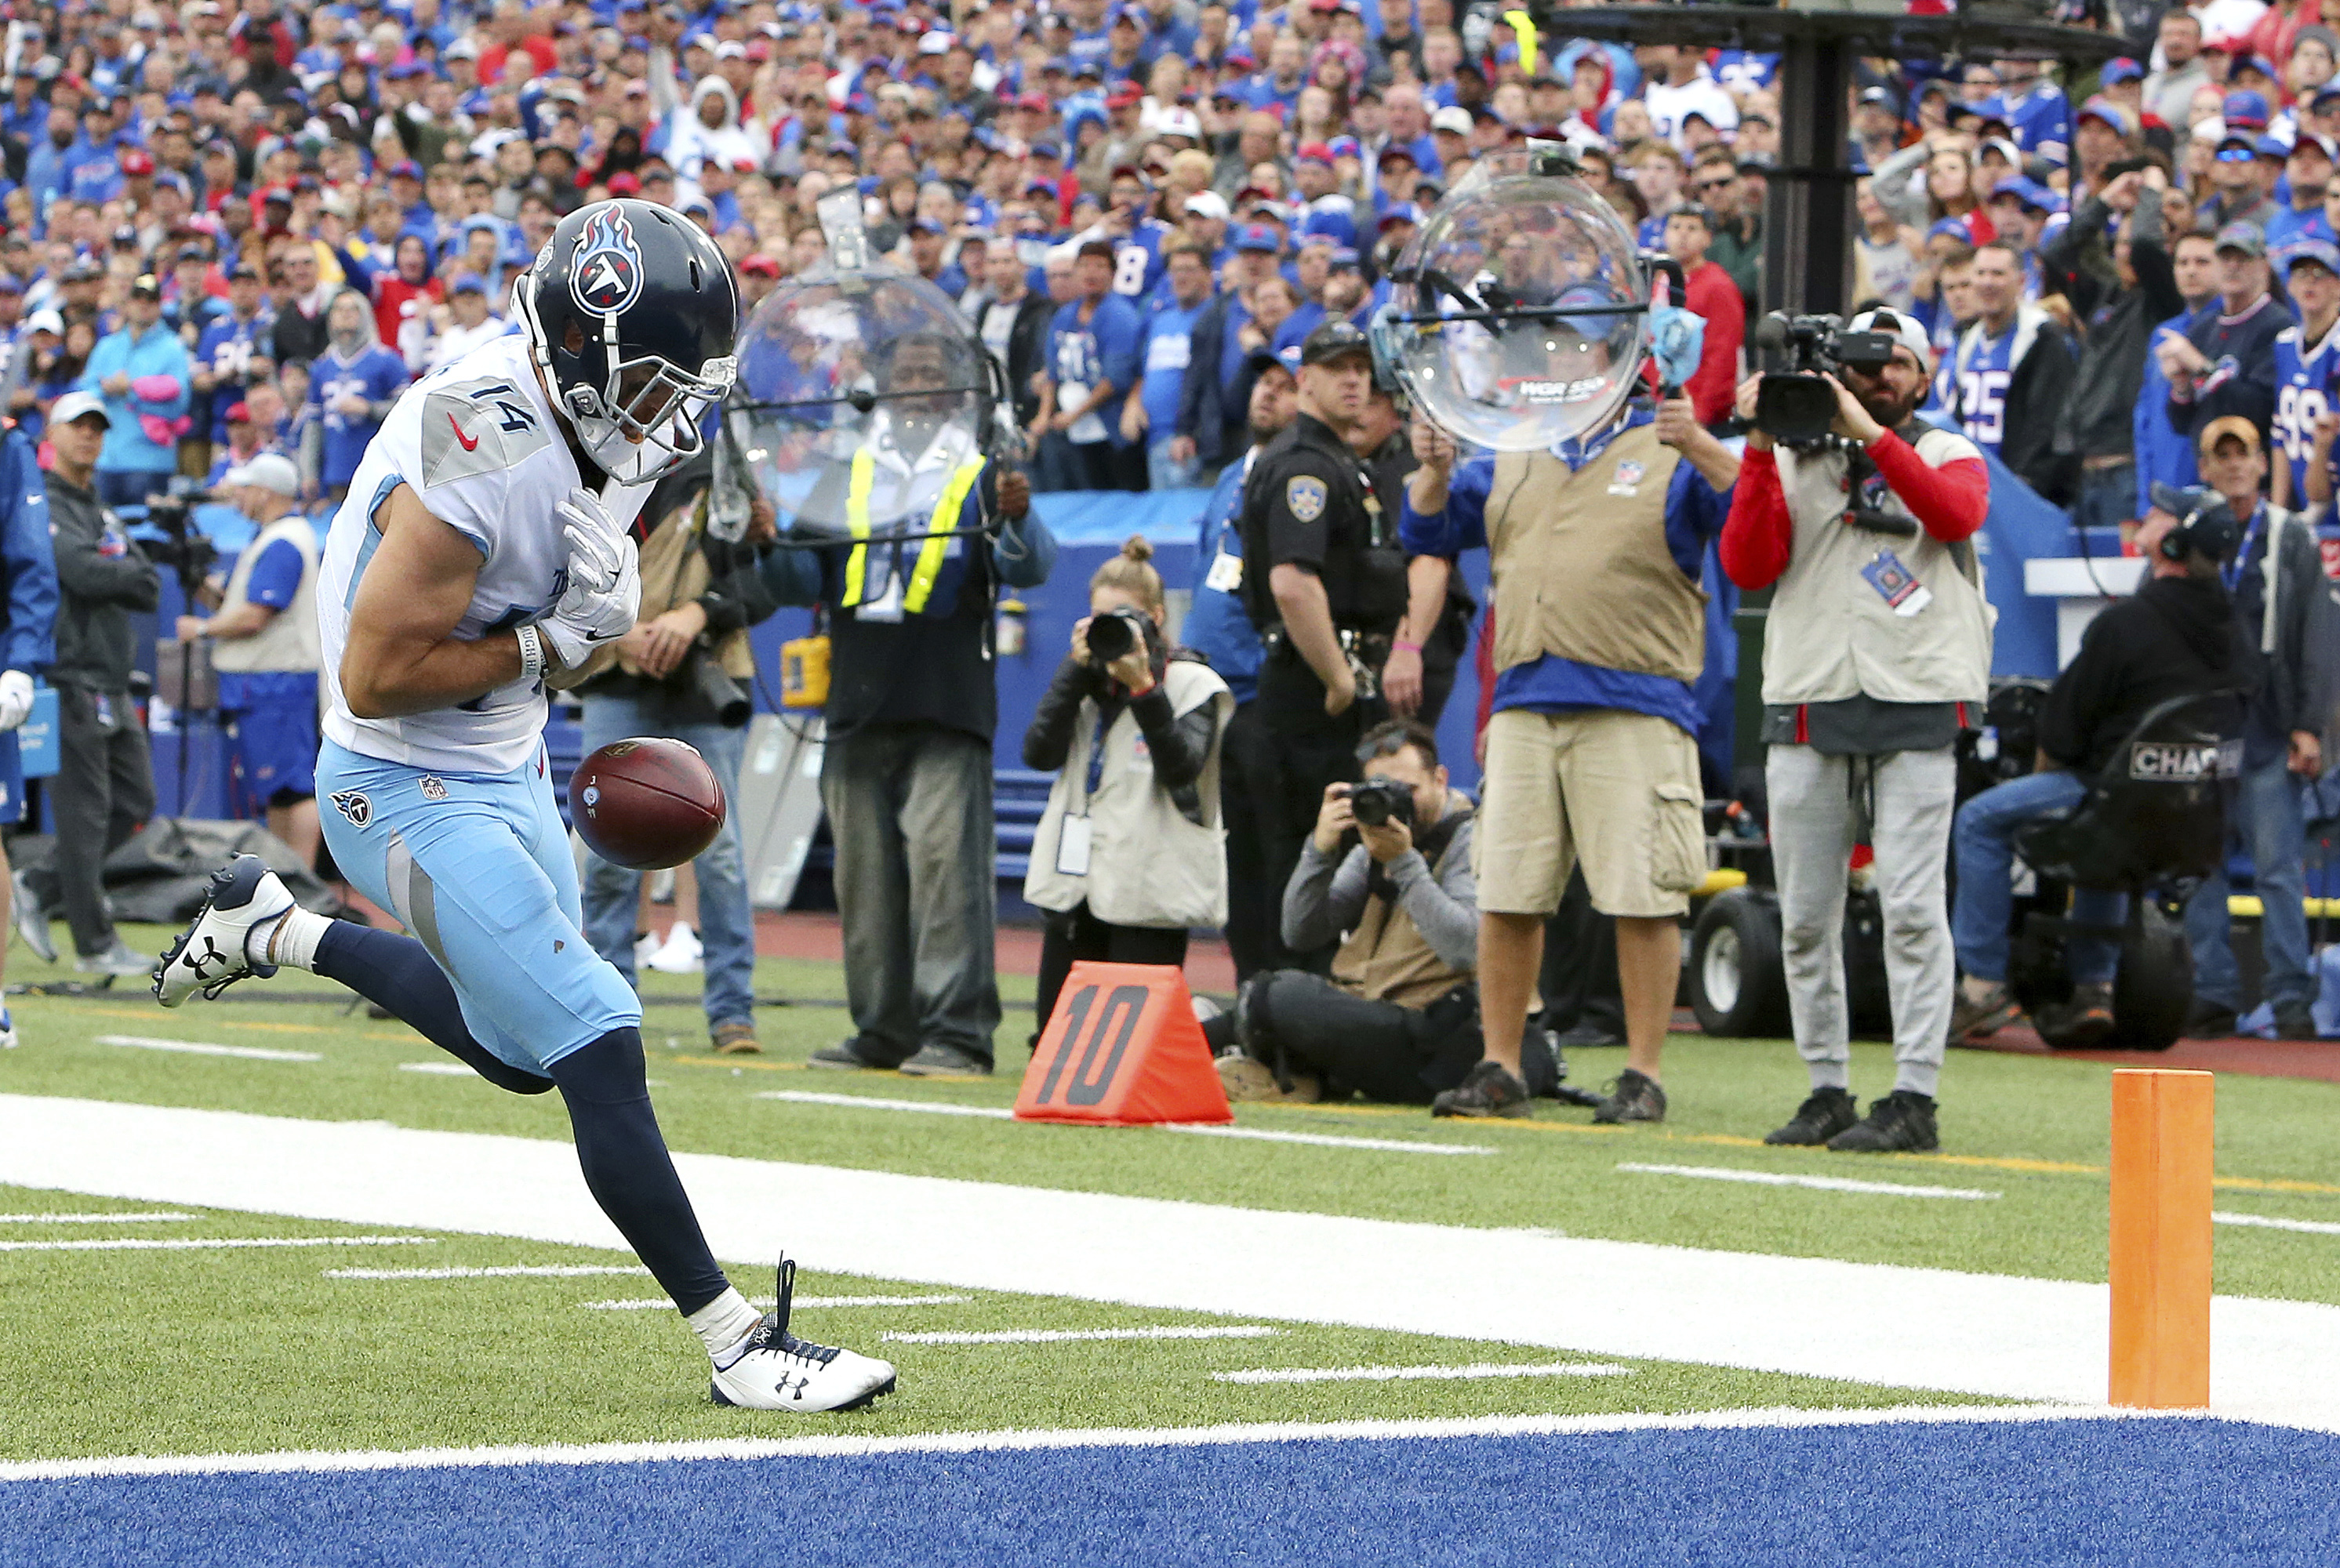 Titans follow up win over Eagles with 13-12 loss to Bills